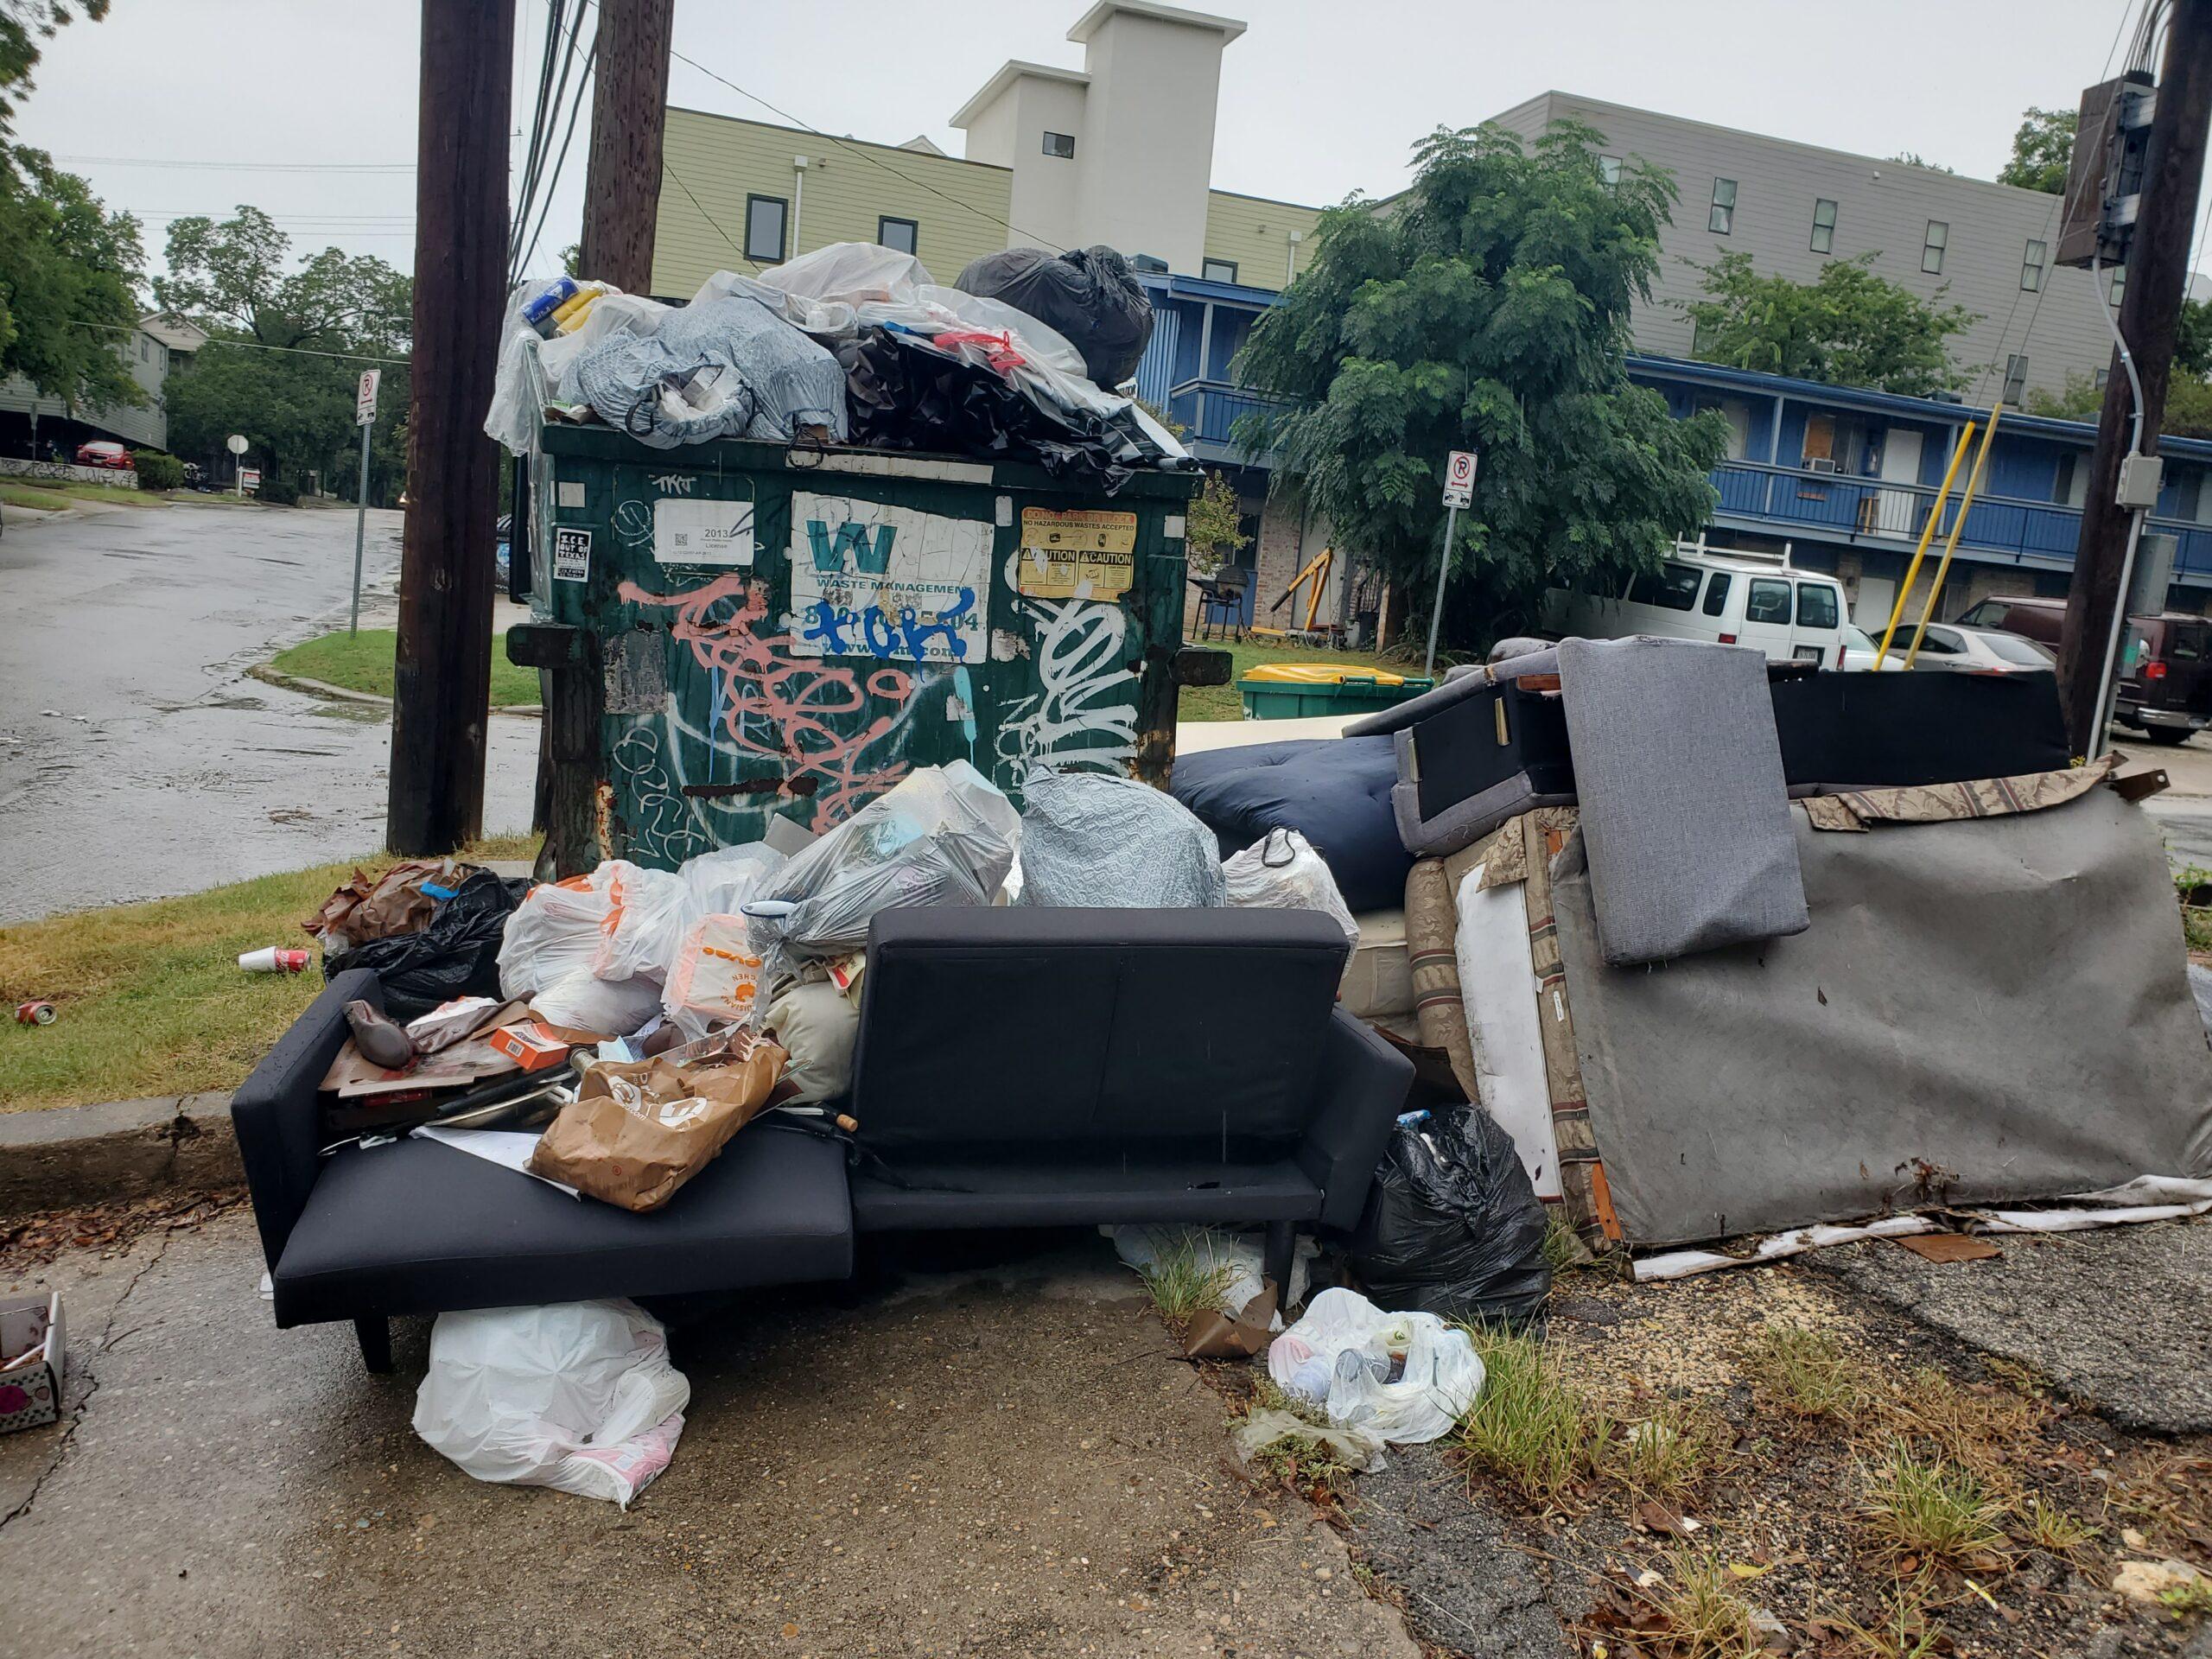 Austin student campus living trash junk by dumpsters